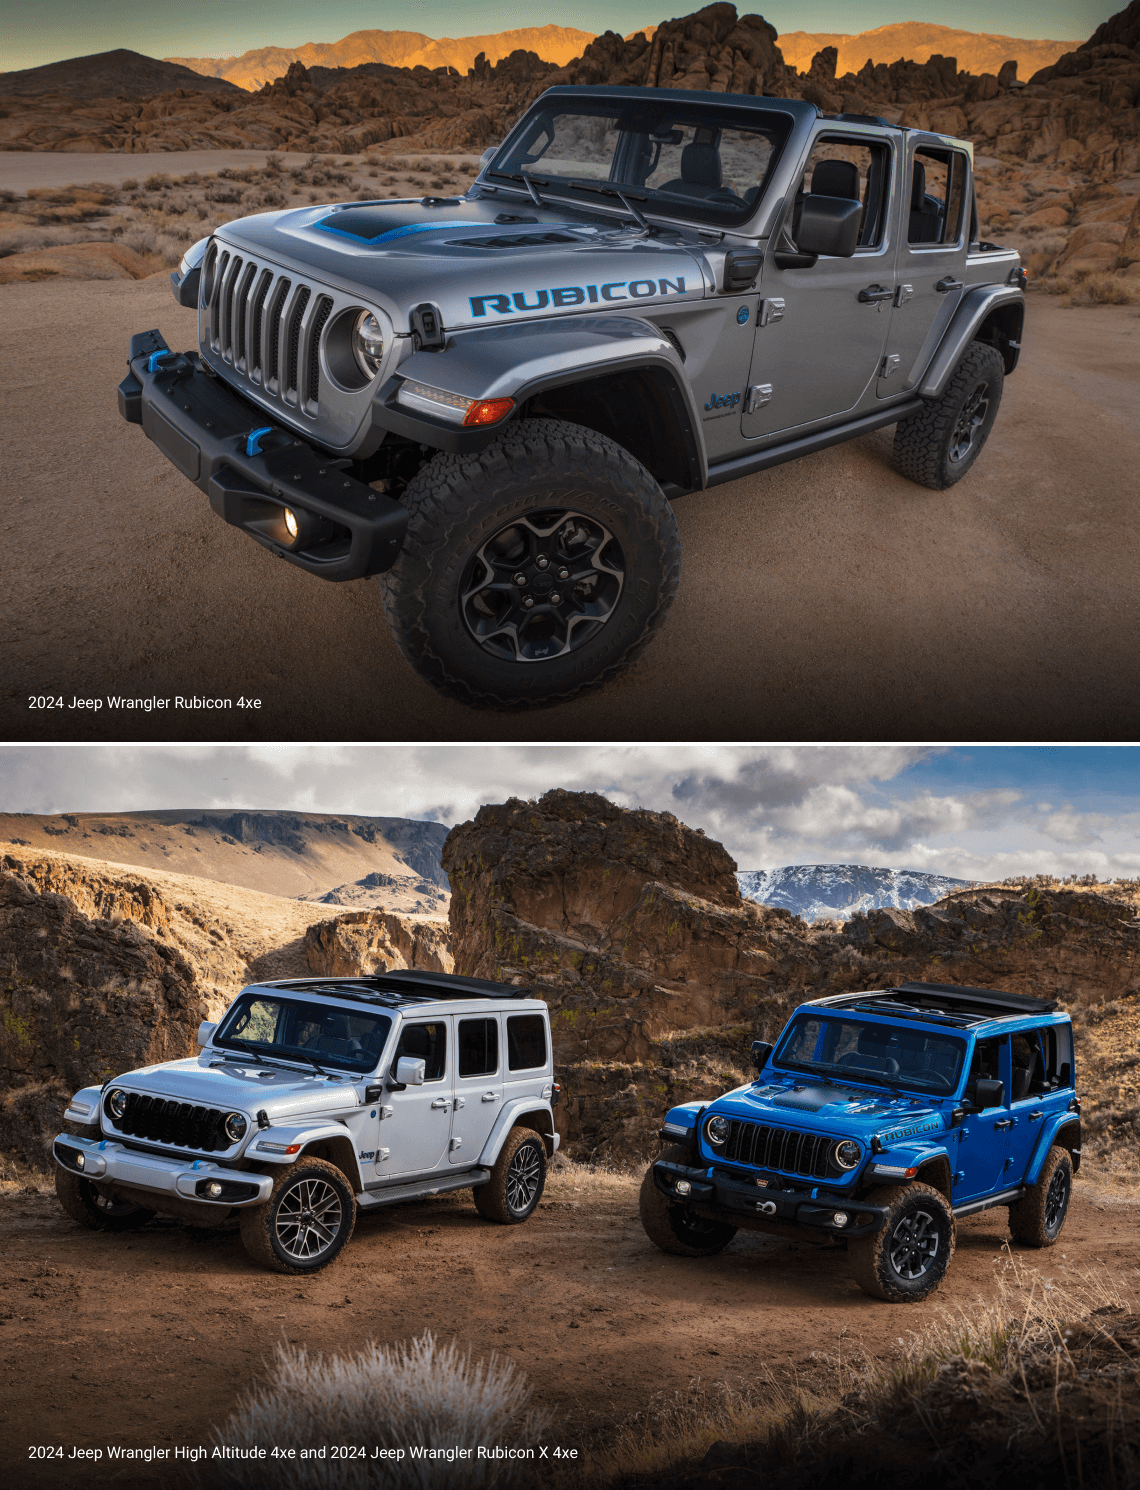 Jeep Wrangler 4xe Specs and Features